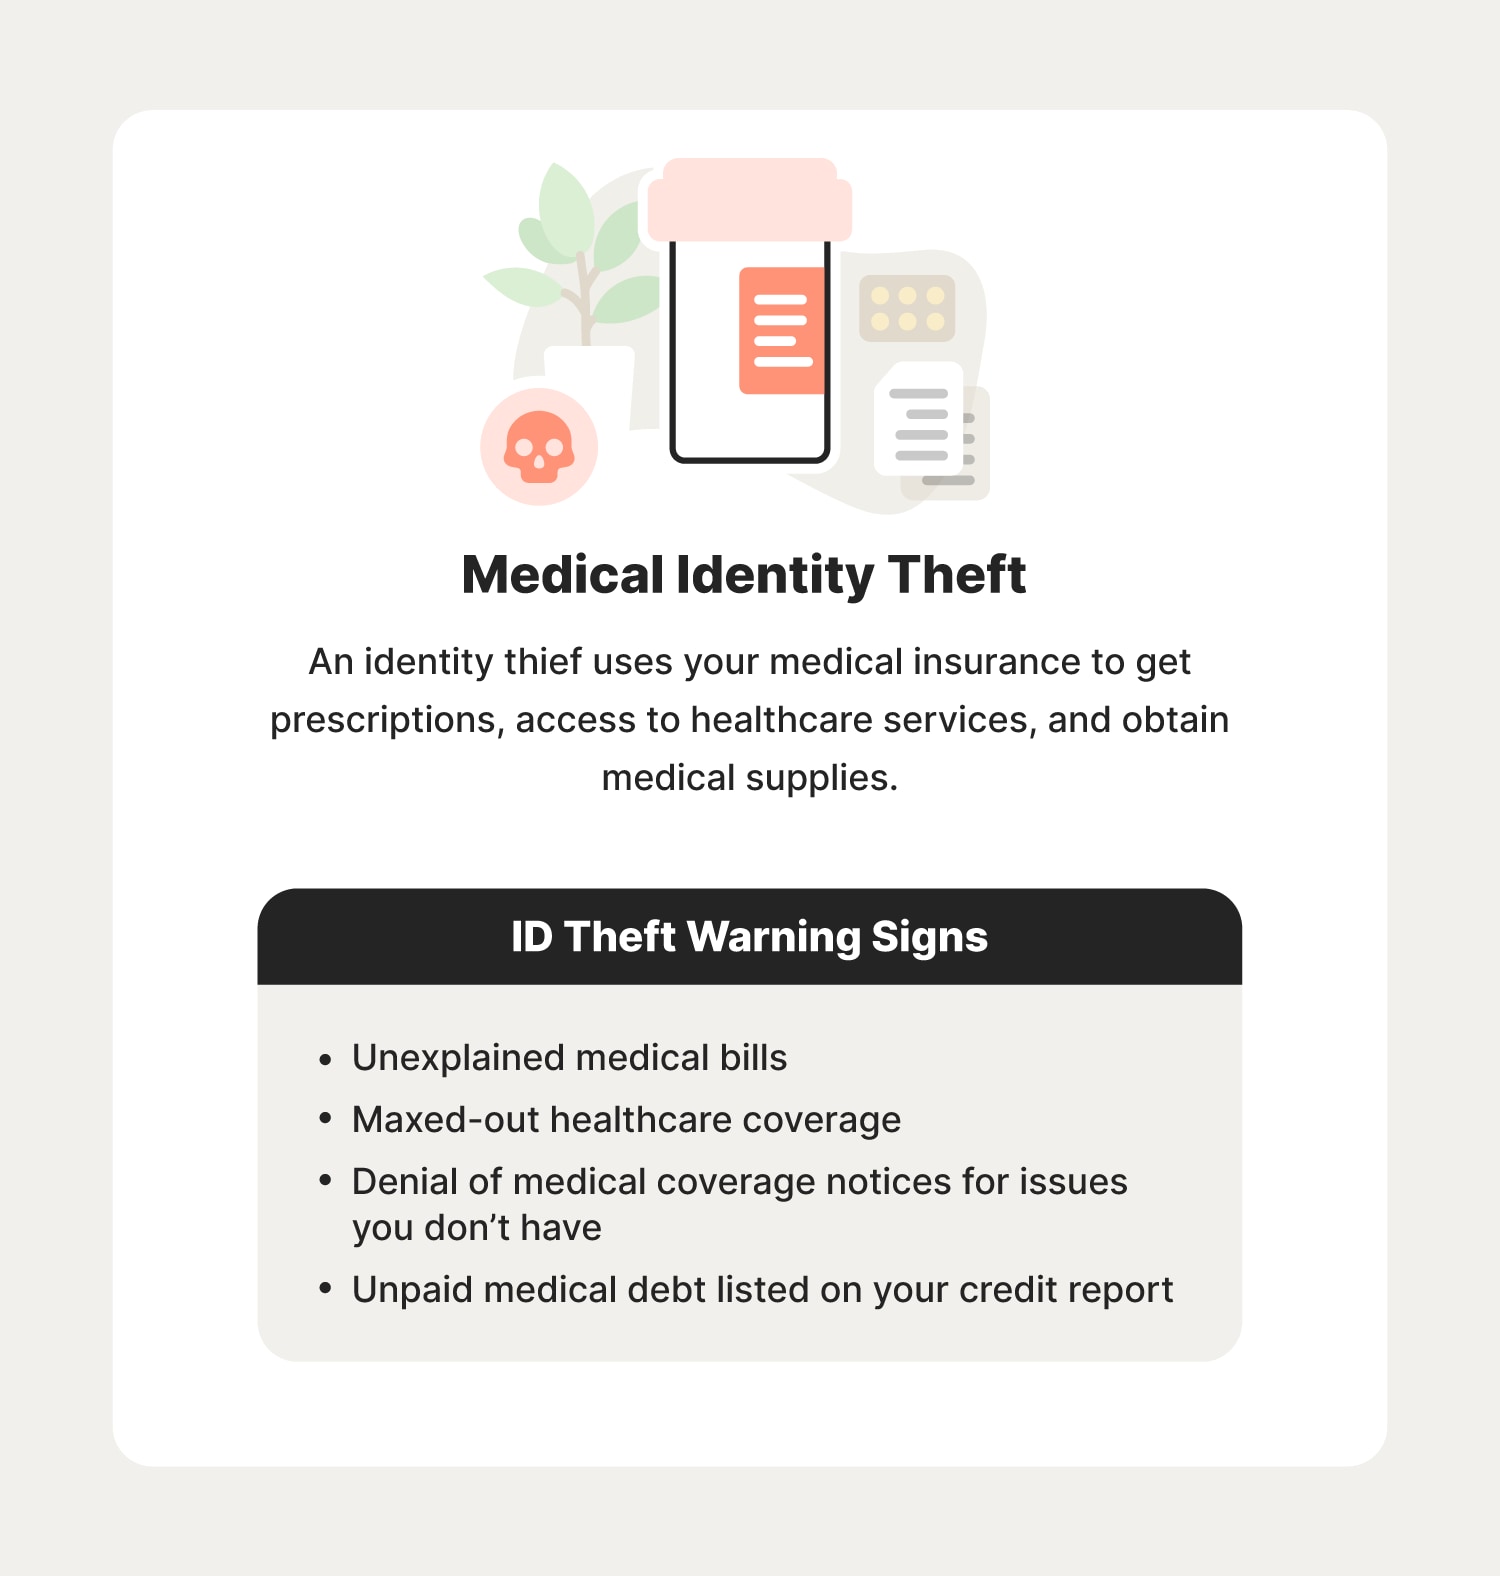 Illustrated chart with information about medical identity theft and some warning signs to look out for.